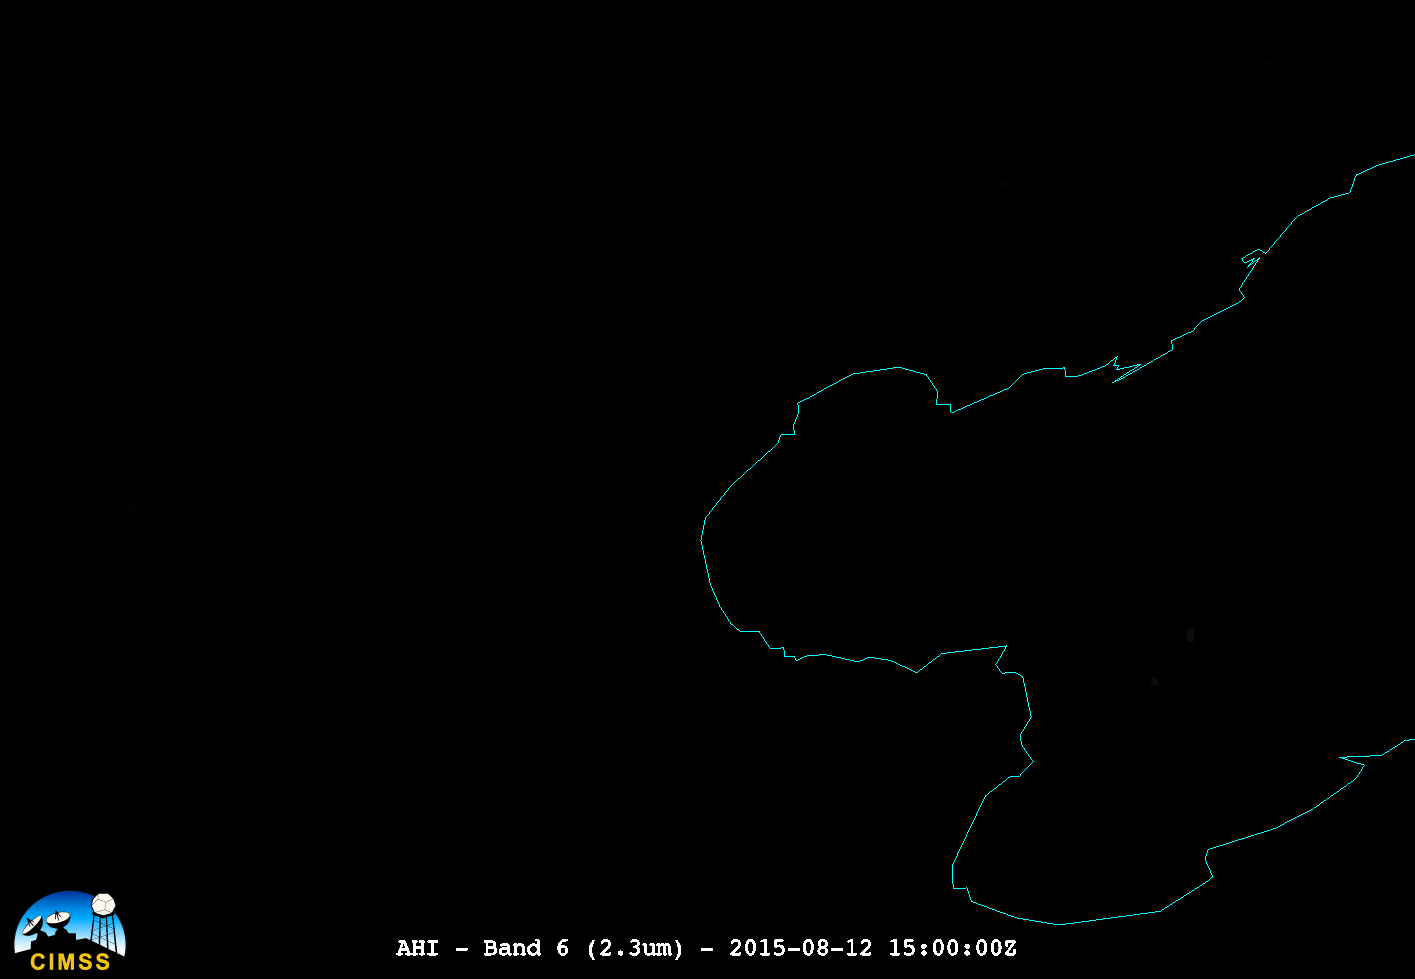 Himawari-8 1.6 µm near-Infrared Imagery, times as indicated [click to animate]